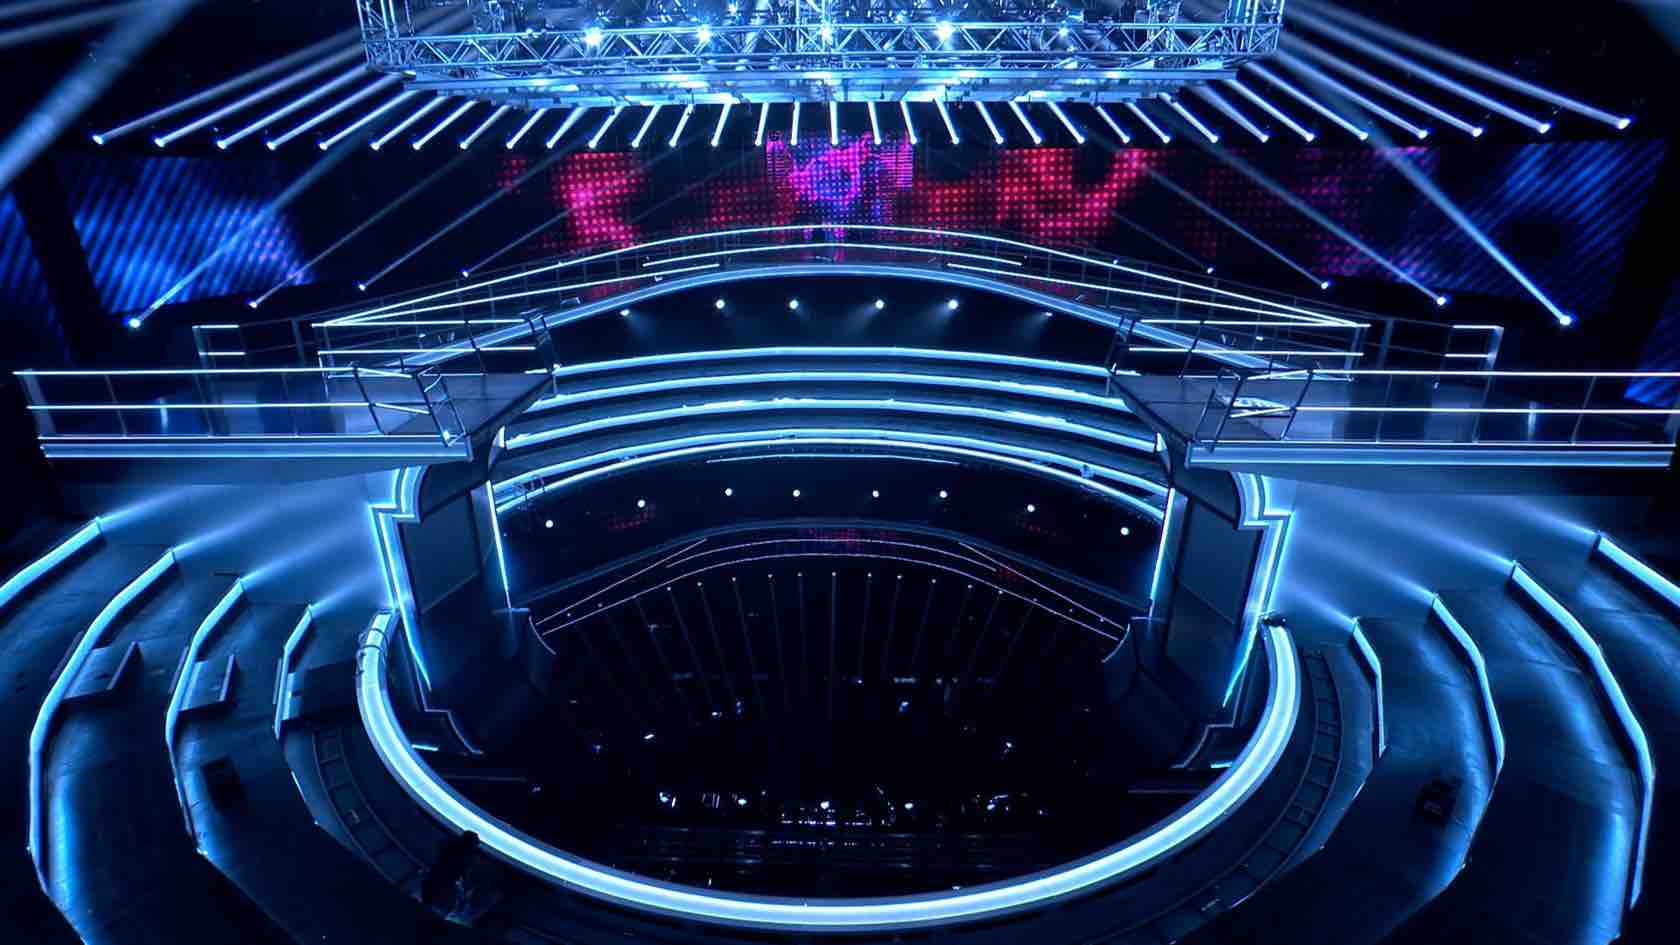 LIGHTING PRODUCTION FOR ITV'S NEW GAME SHOW